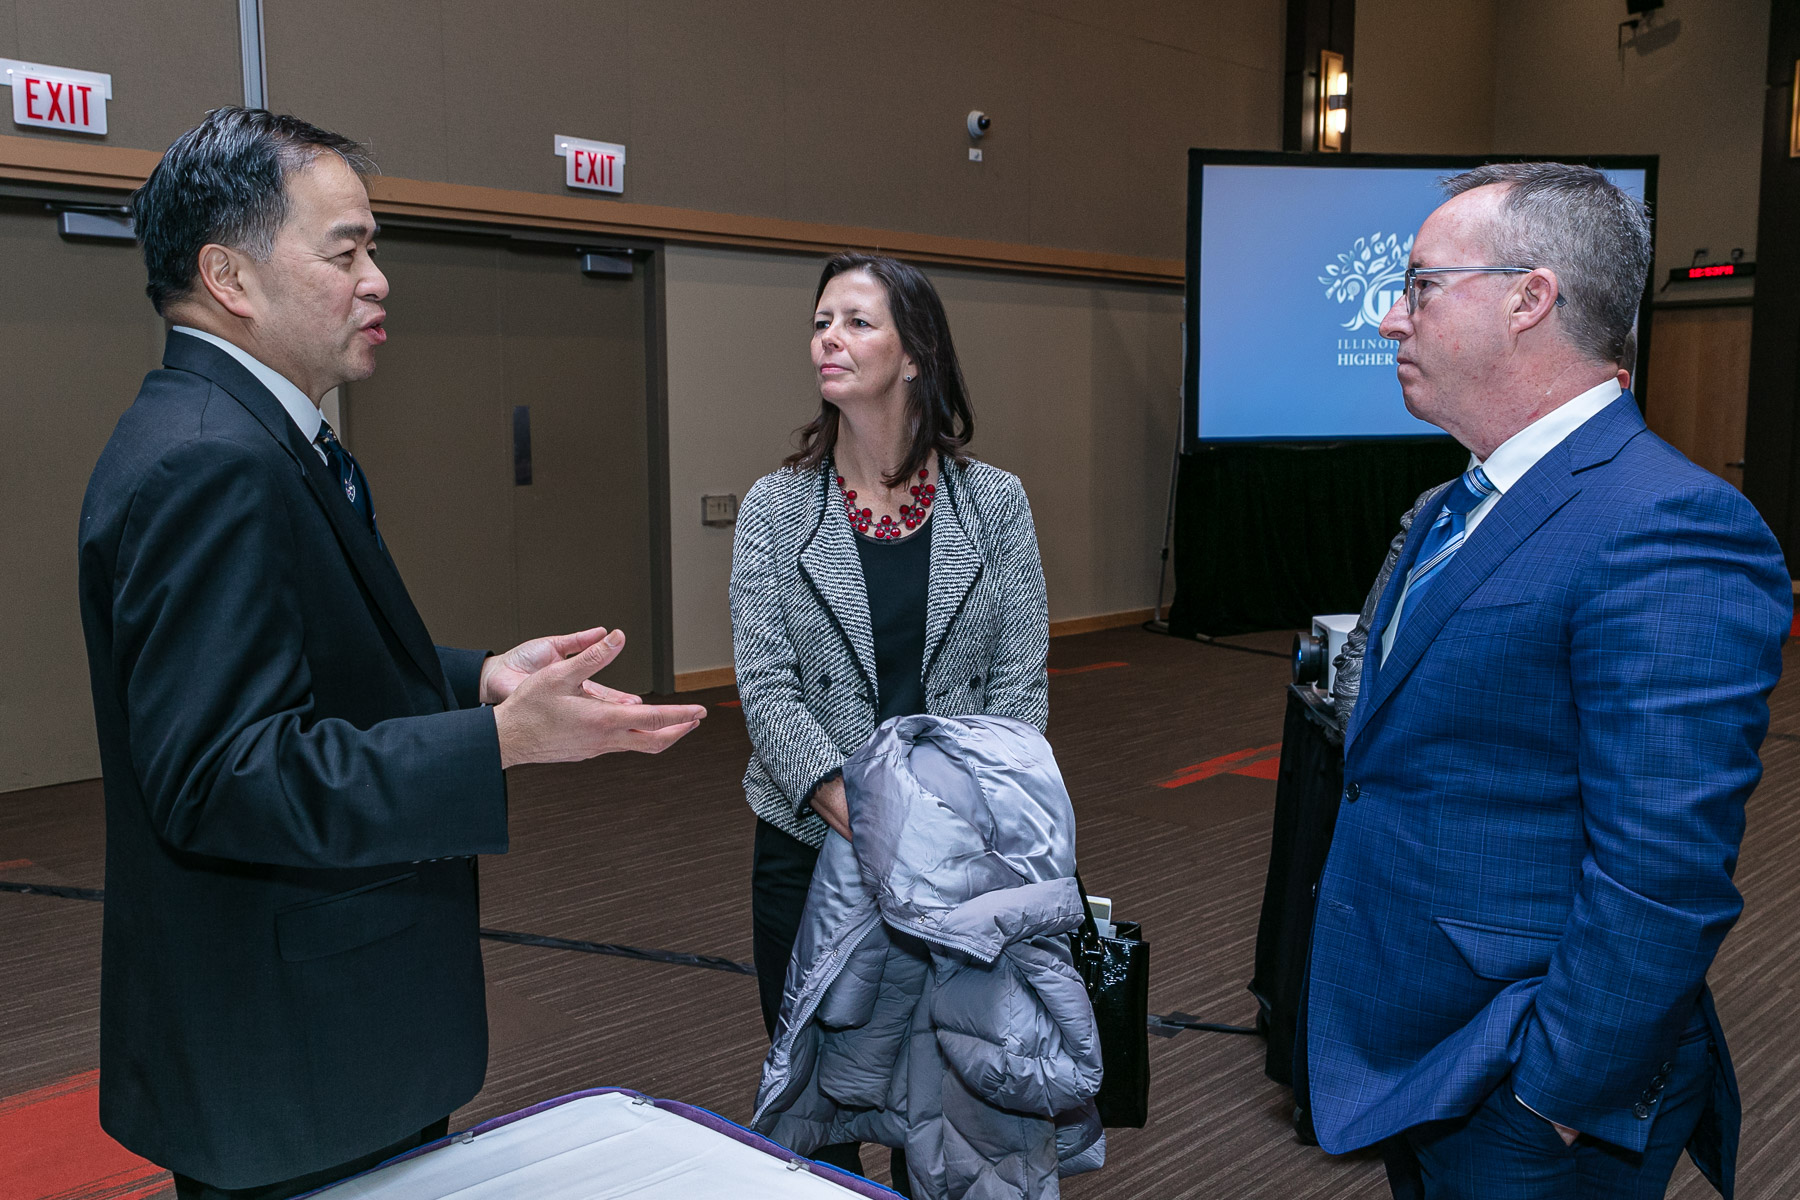 Left to right, A. Gabriel Esteban, Ph.D., president of DePaul; Illinois Rep. Kelly Burke (D); and John Atkinson, chair of Illinois Board of Higher Education; chat before the meeting begins. (DePaul University/Randall Spriggs)